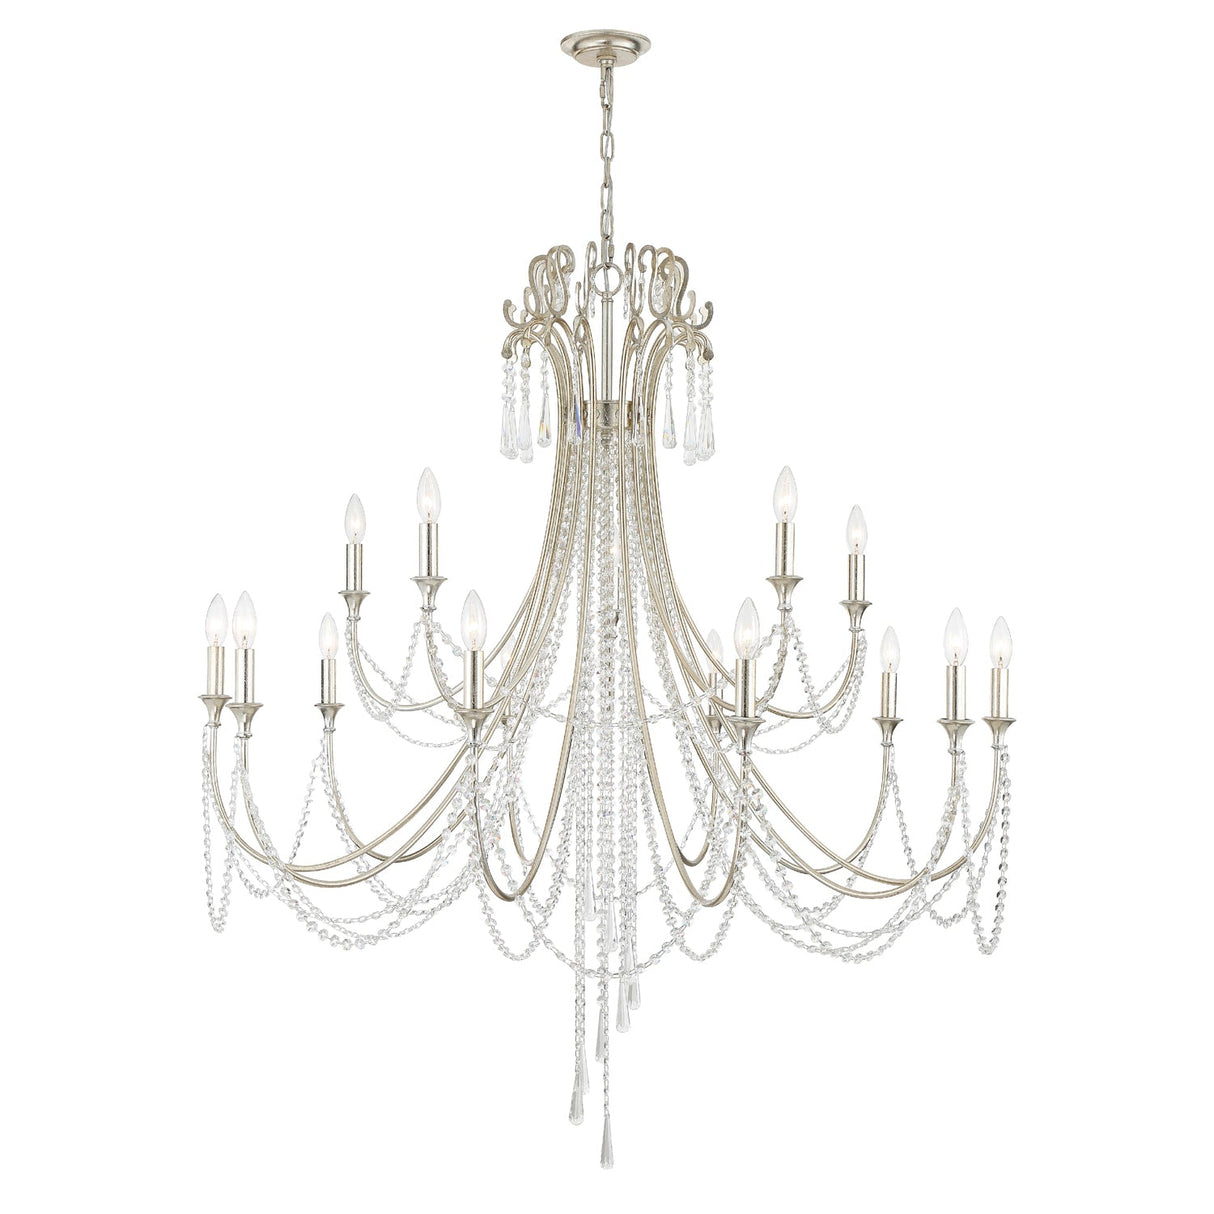 Arcadia 15 Light Antique Silver Chandelier ARC-1919-SA-CL-MWP